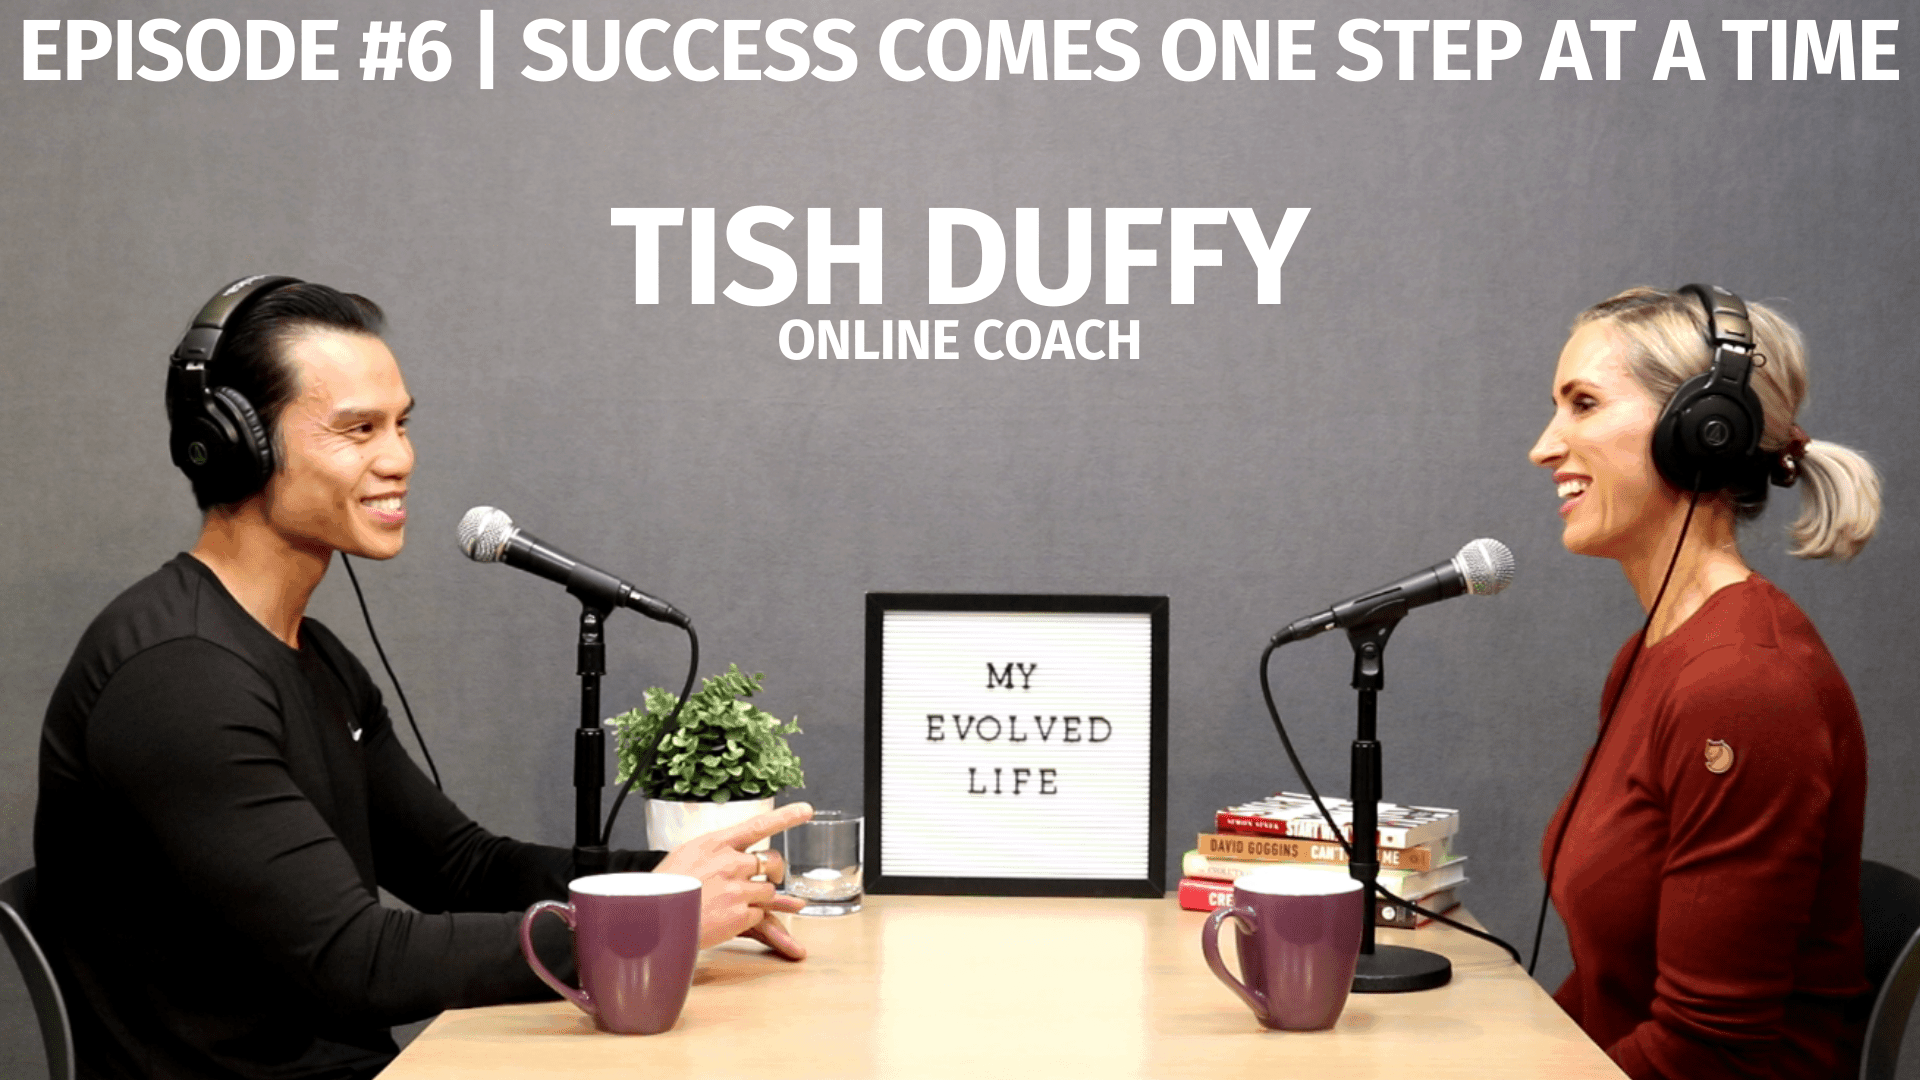 My Evolved Life  Episode #6 - Tish Duffy - Success Comes One Step at a Time